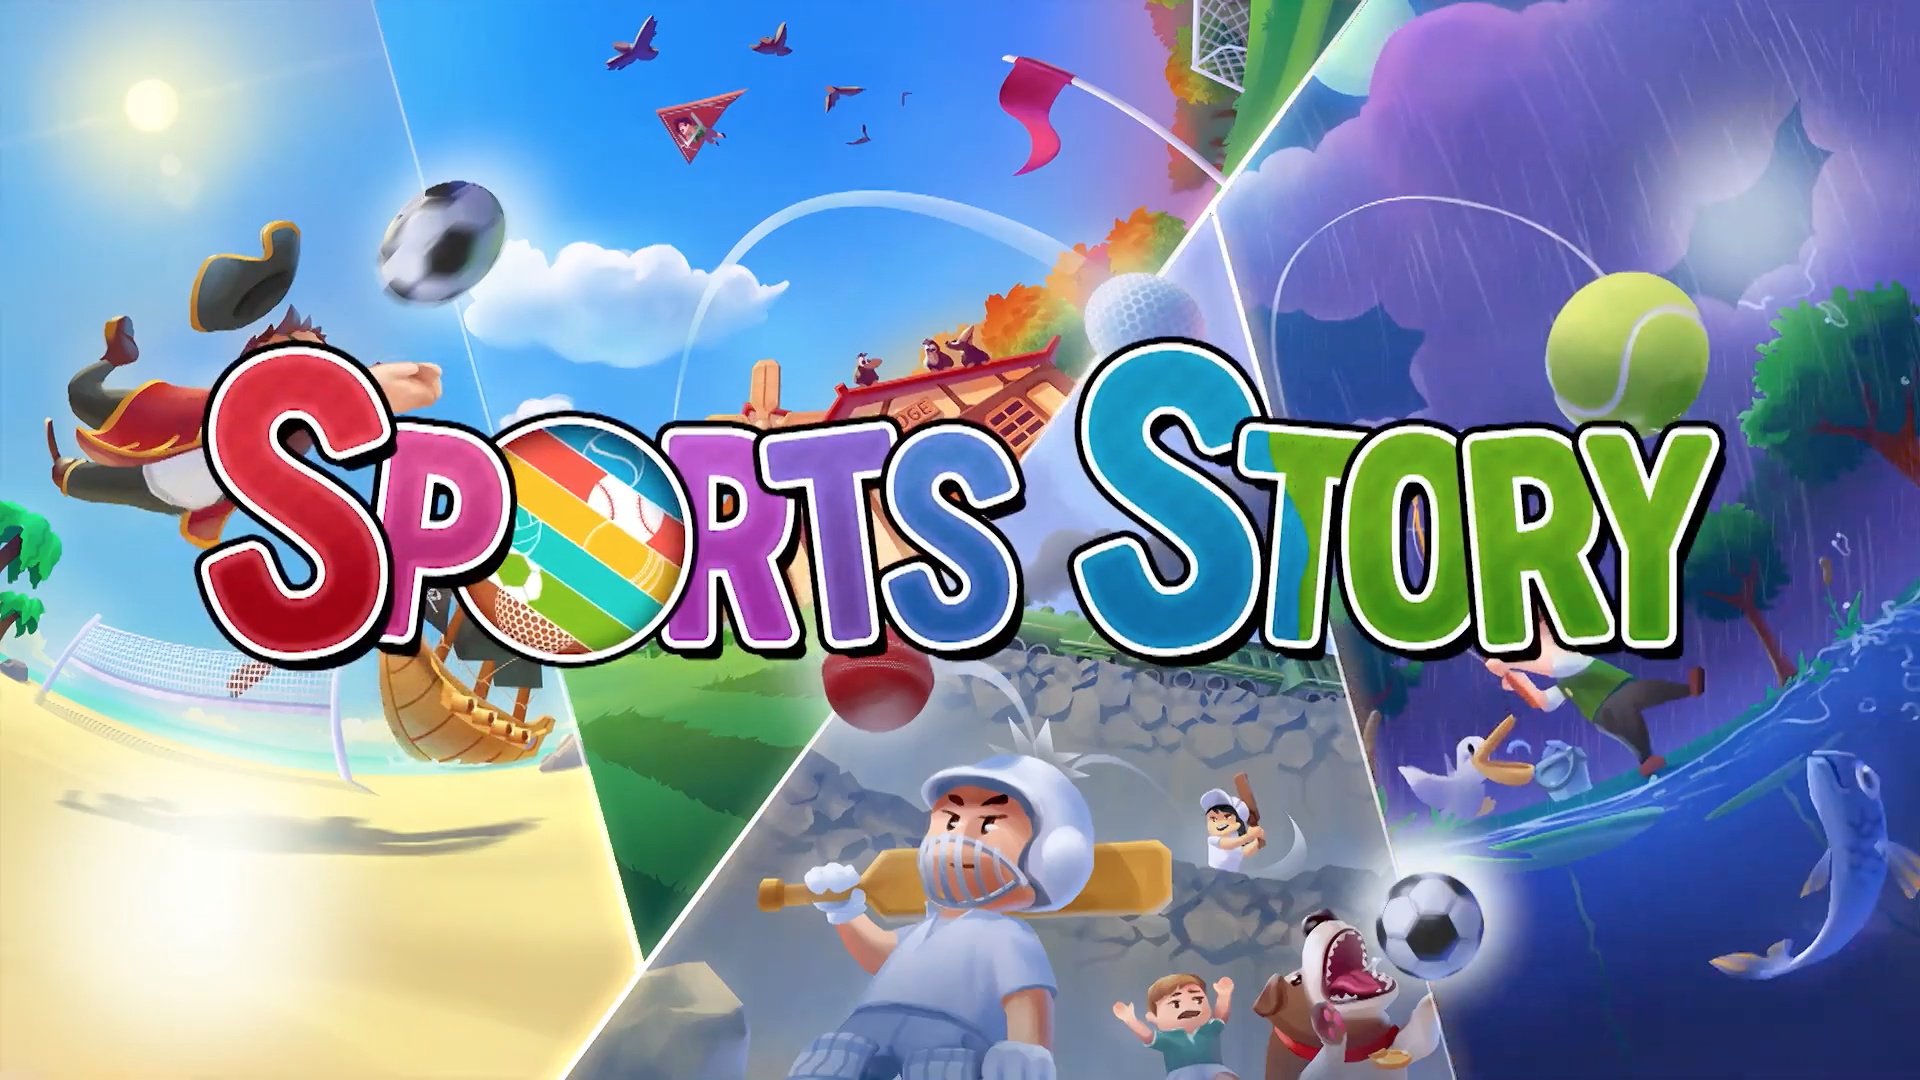 download soccer story switch for free